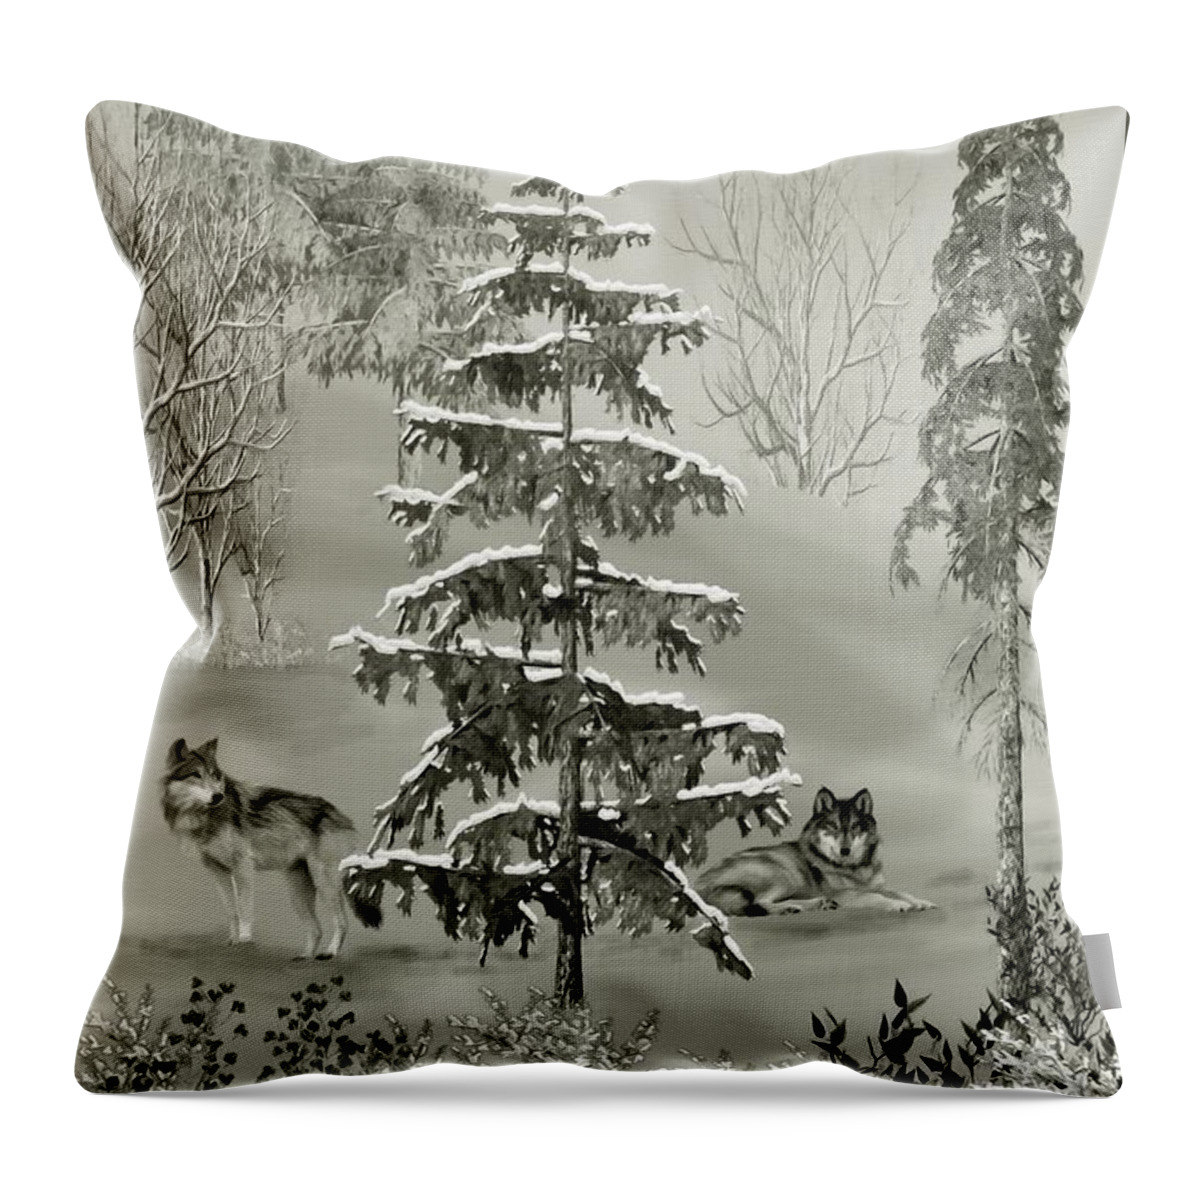 Wolf Throw Pillow featuring the mixed media Wolves In The Winter Forest by David Dehner